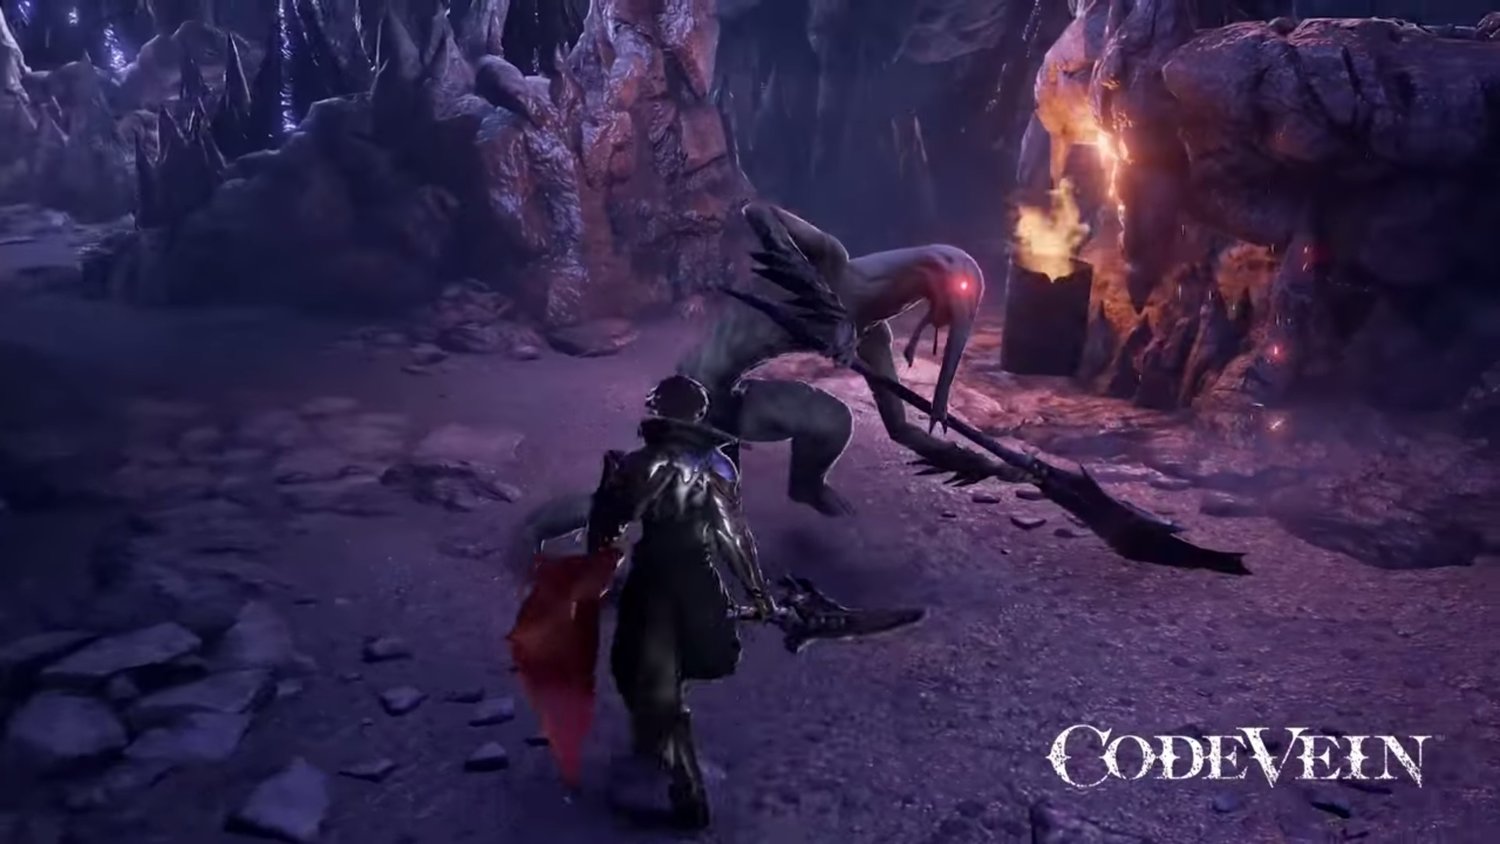 Code Vein Walkthrough, Guide, Gameplay, And More - News